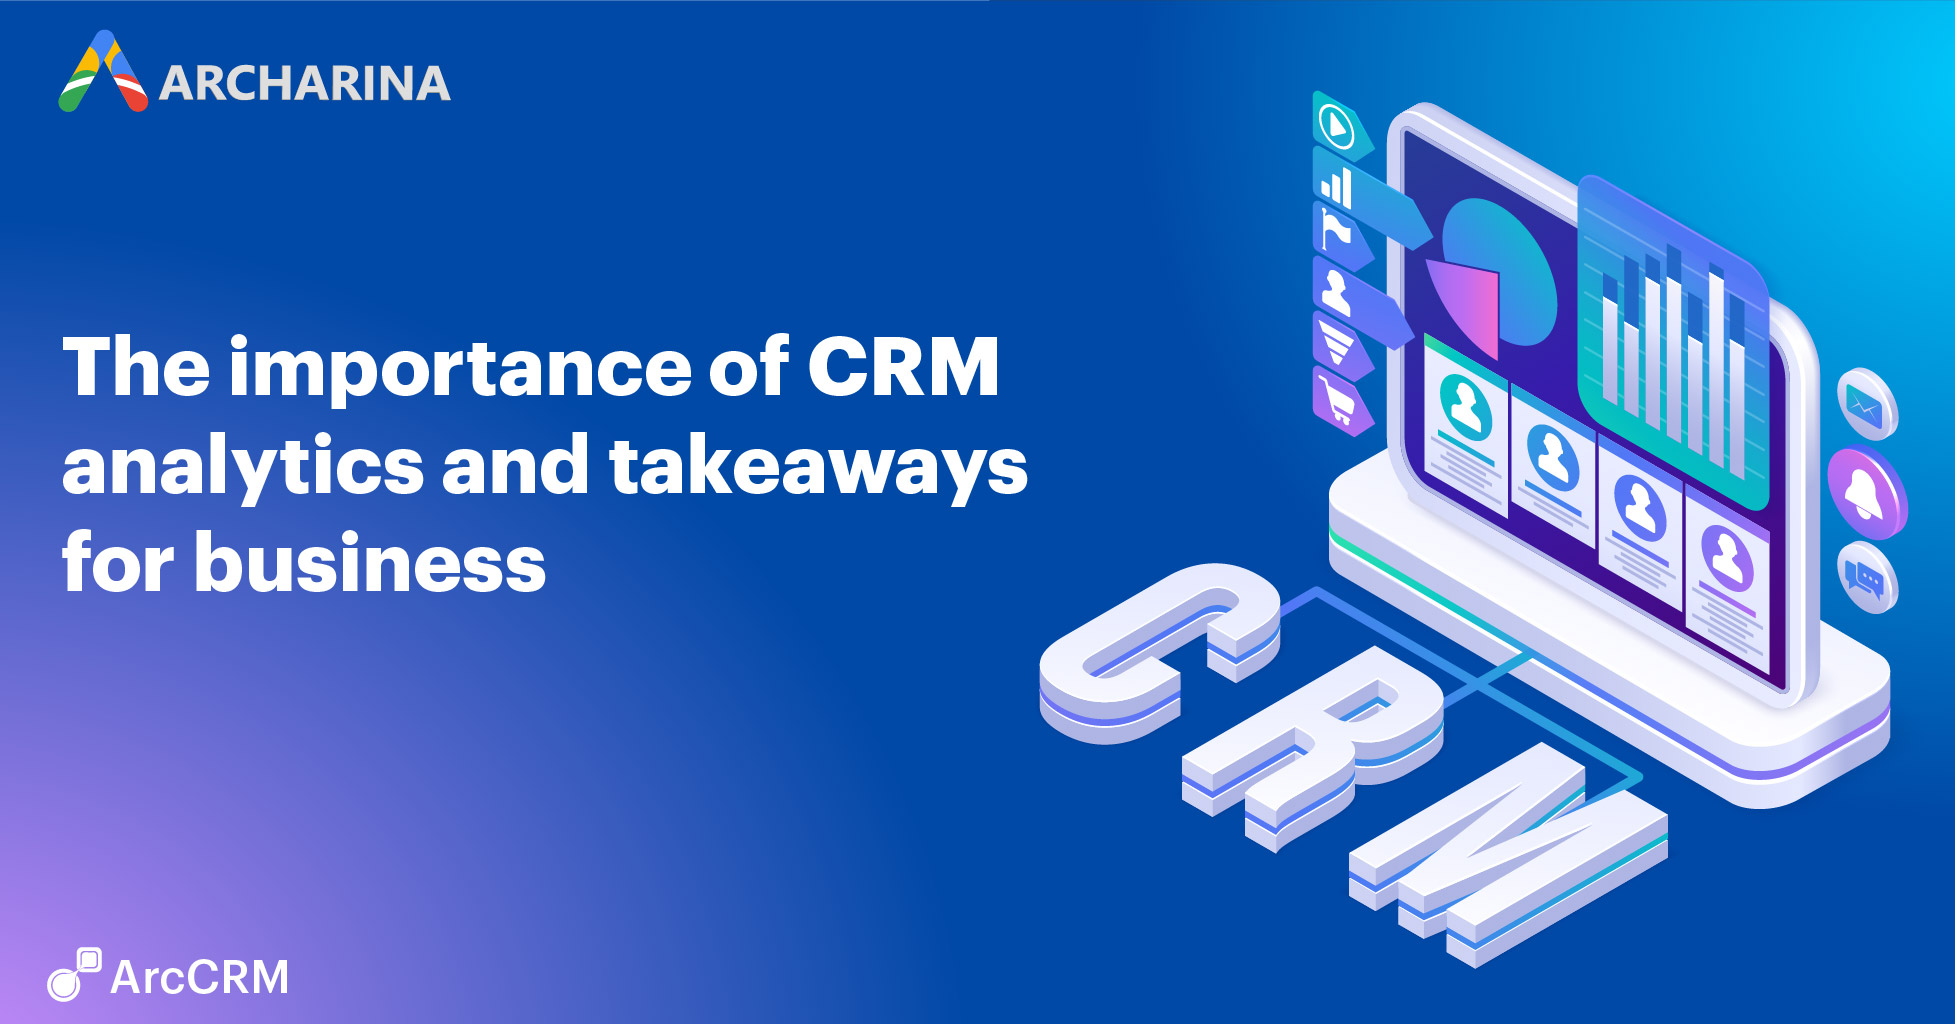 The importance of CRM analytics and takeaways for business